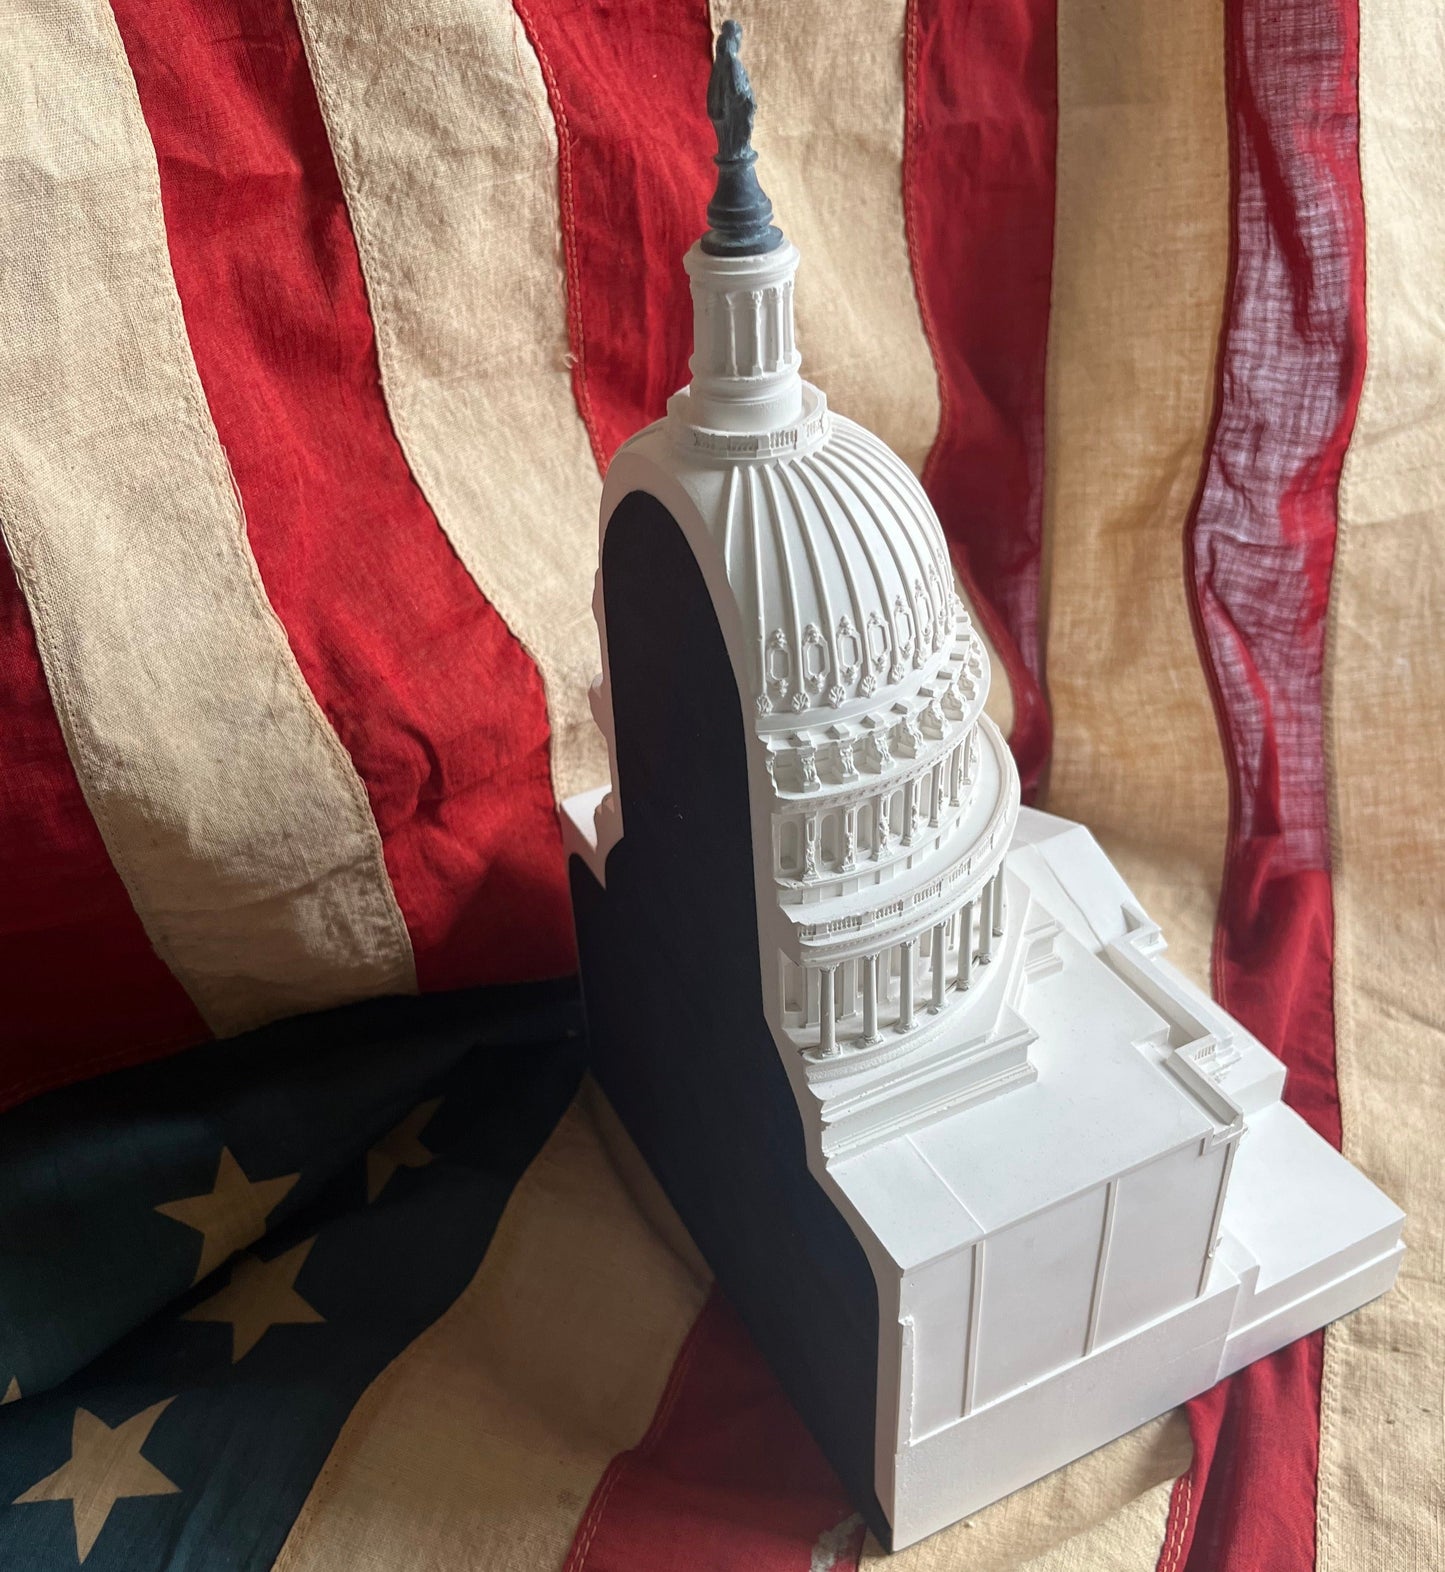 Capitol Building Sculpture Award | AGC PAC | Marble Base Only | White Cararra Marble | 7 by 8 by 1.25 inches